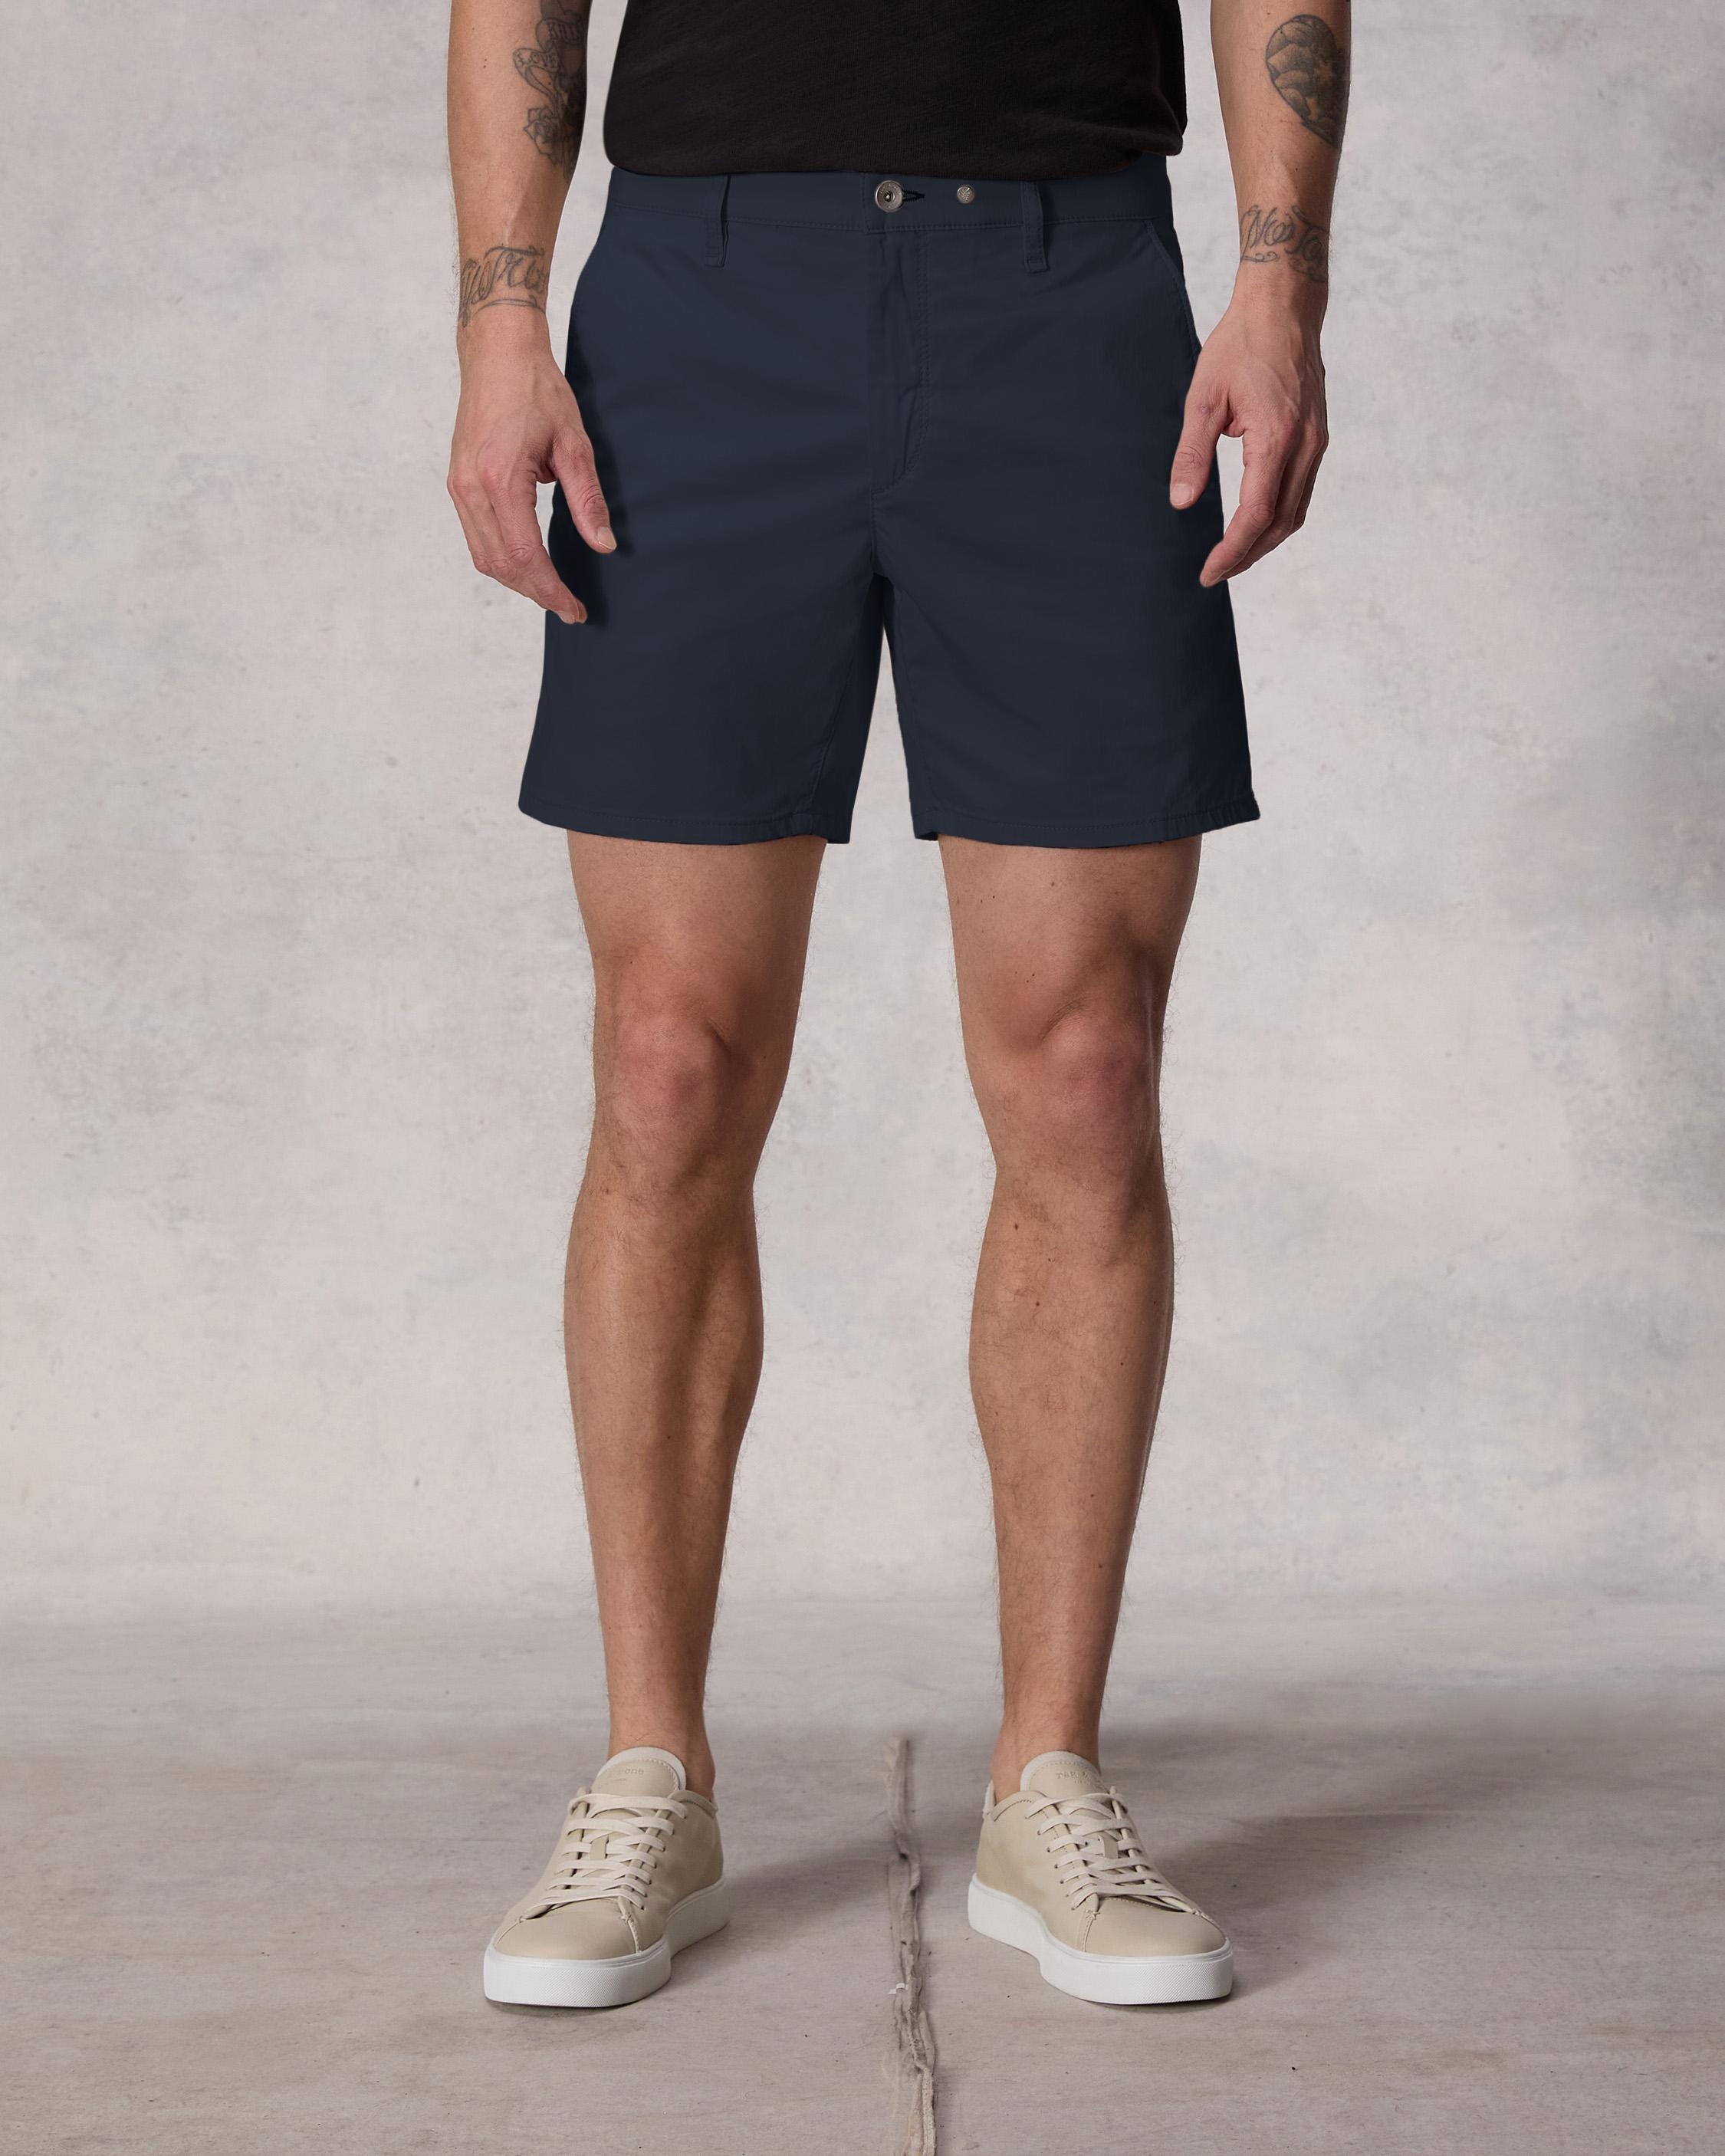 Standard Cotton Chino Short
Classic Fit - 5